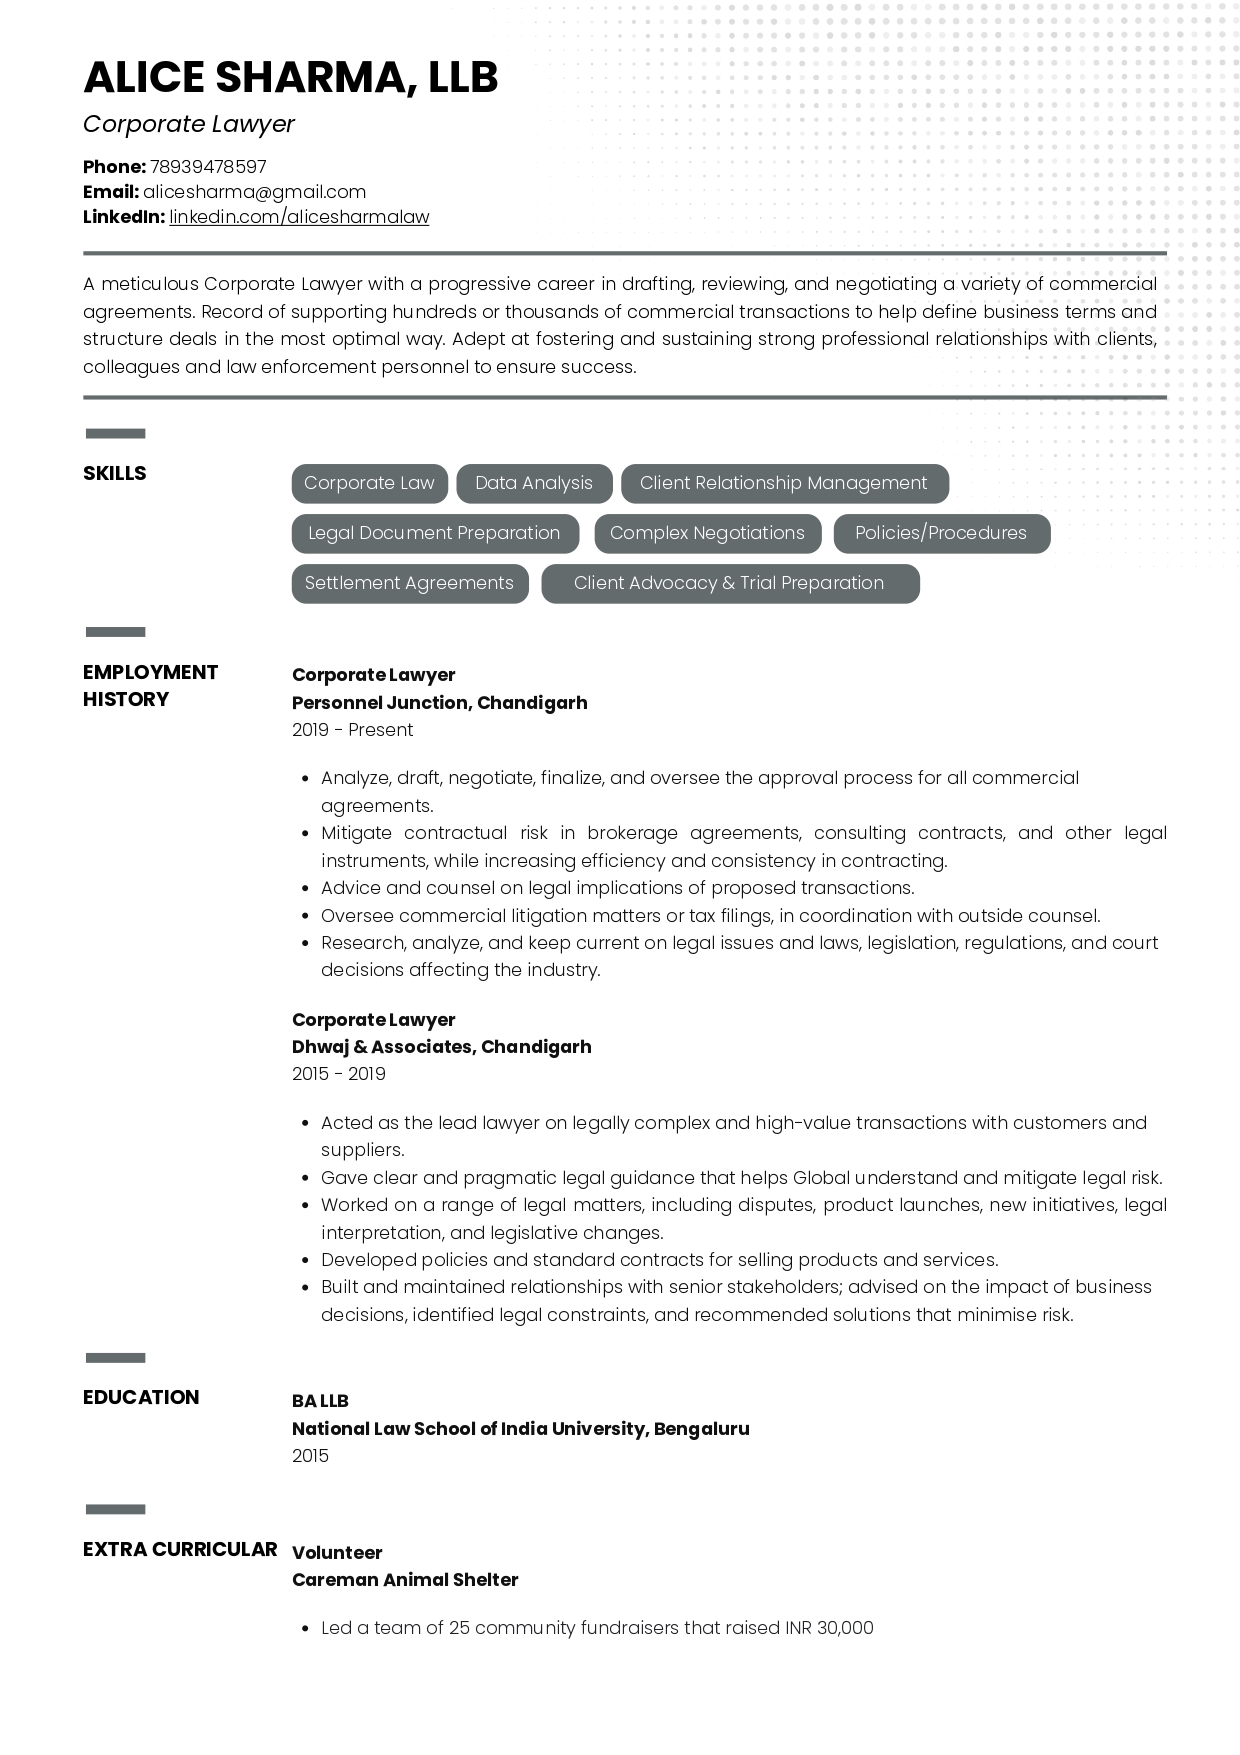 Sample Resume of Corporate Lawyer | Free Resume Templates & Samples on Resumod.co